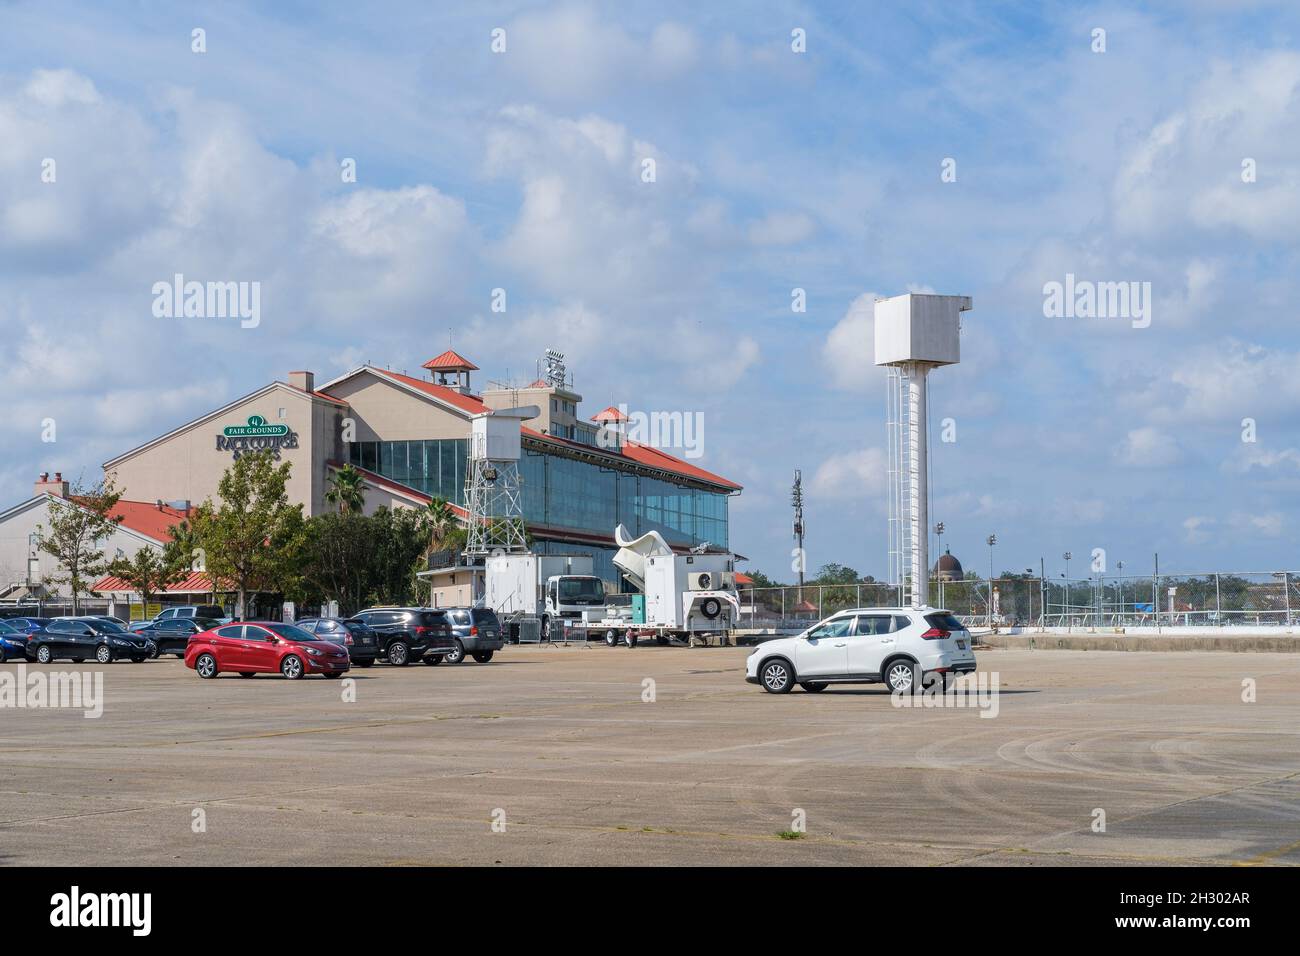 NEW ORLEANS, LA, USA - OCTOBER 23, 2021: New Orleans Fairgrounds Race Track Stock Photo